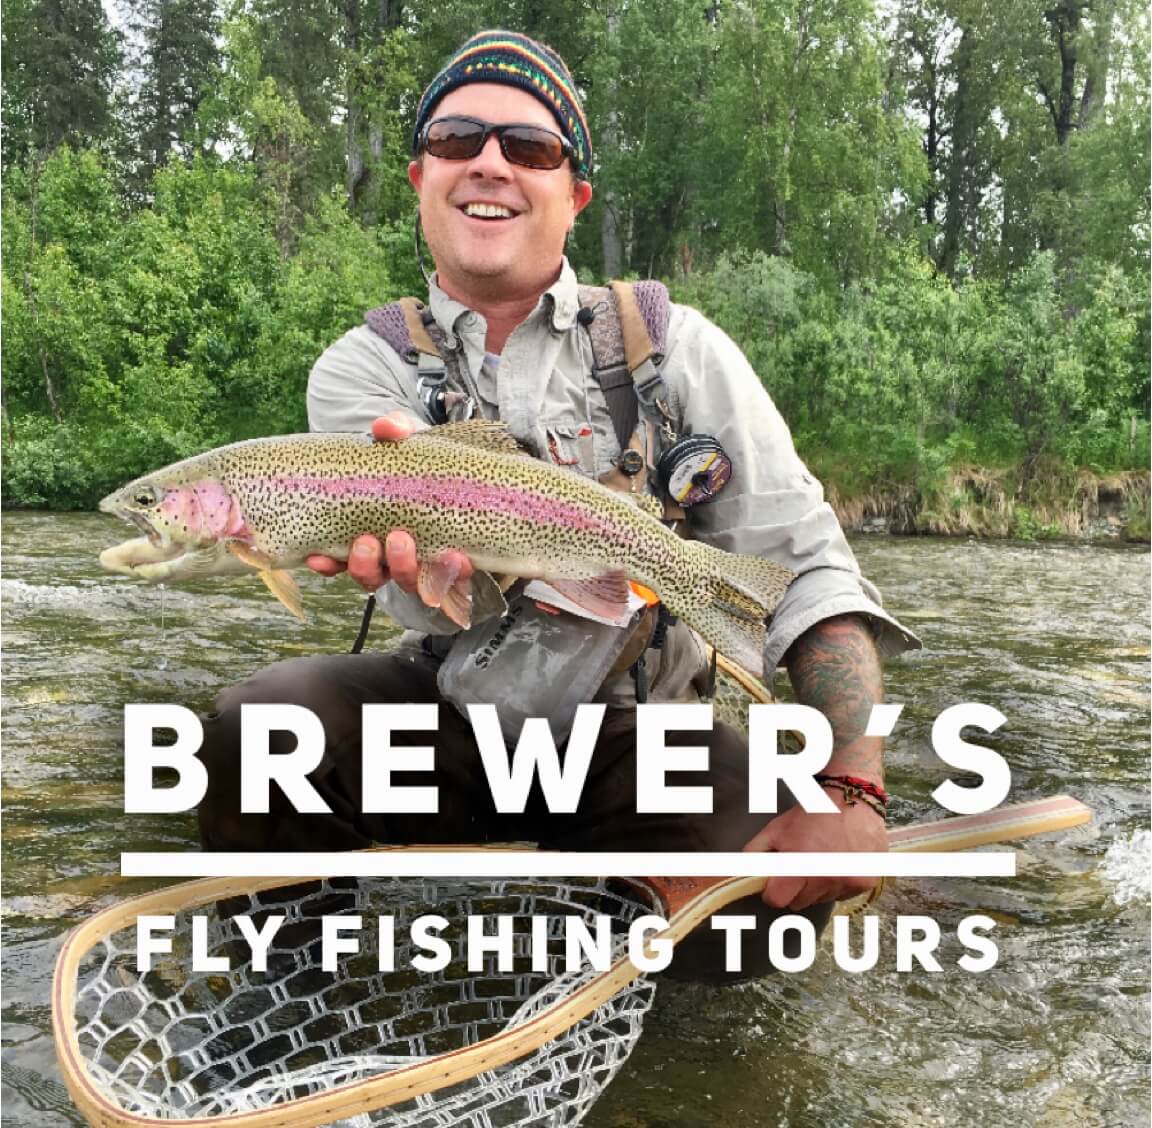 Brewer’s Fly Fishing Tours